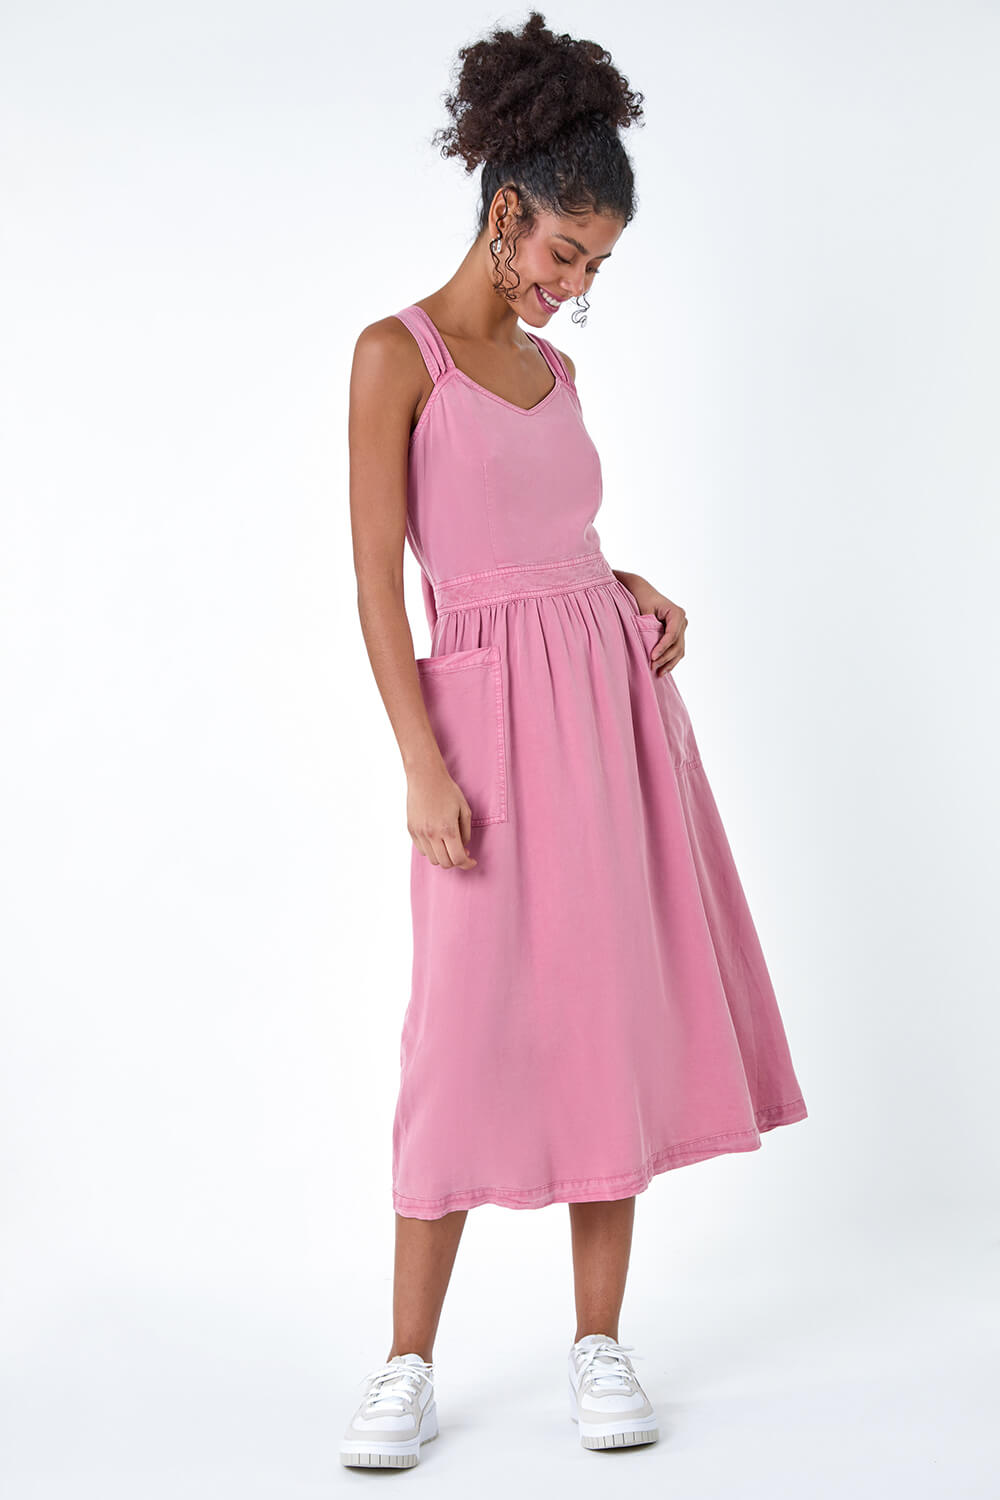 PINK Dyed Strappy Pocket Dress, Image 2 of 5